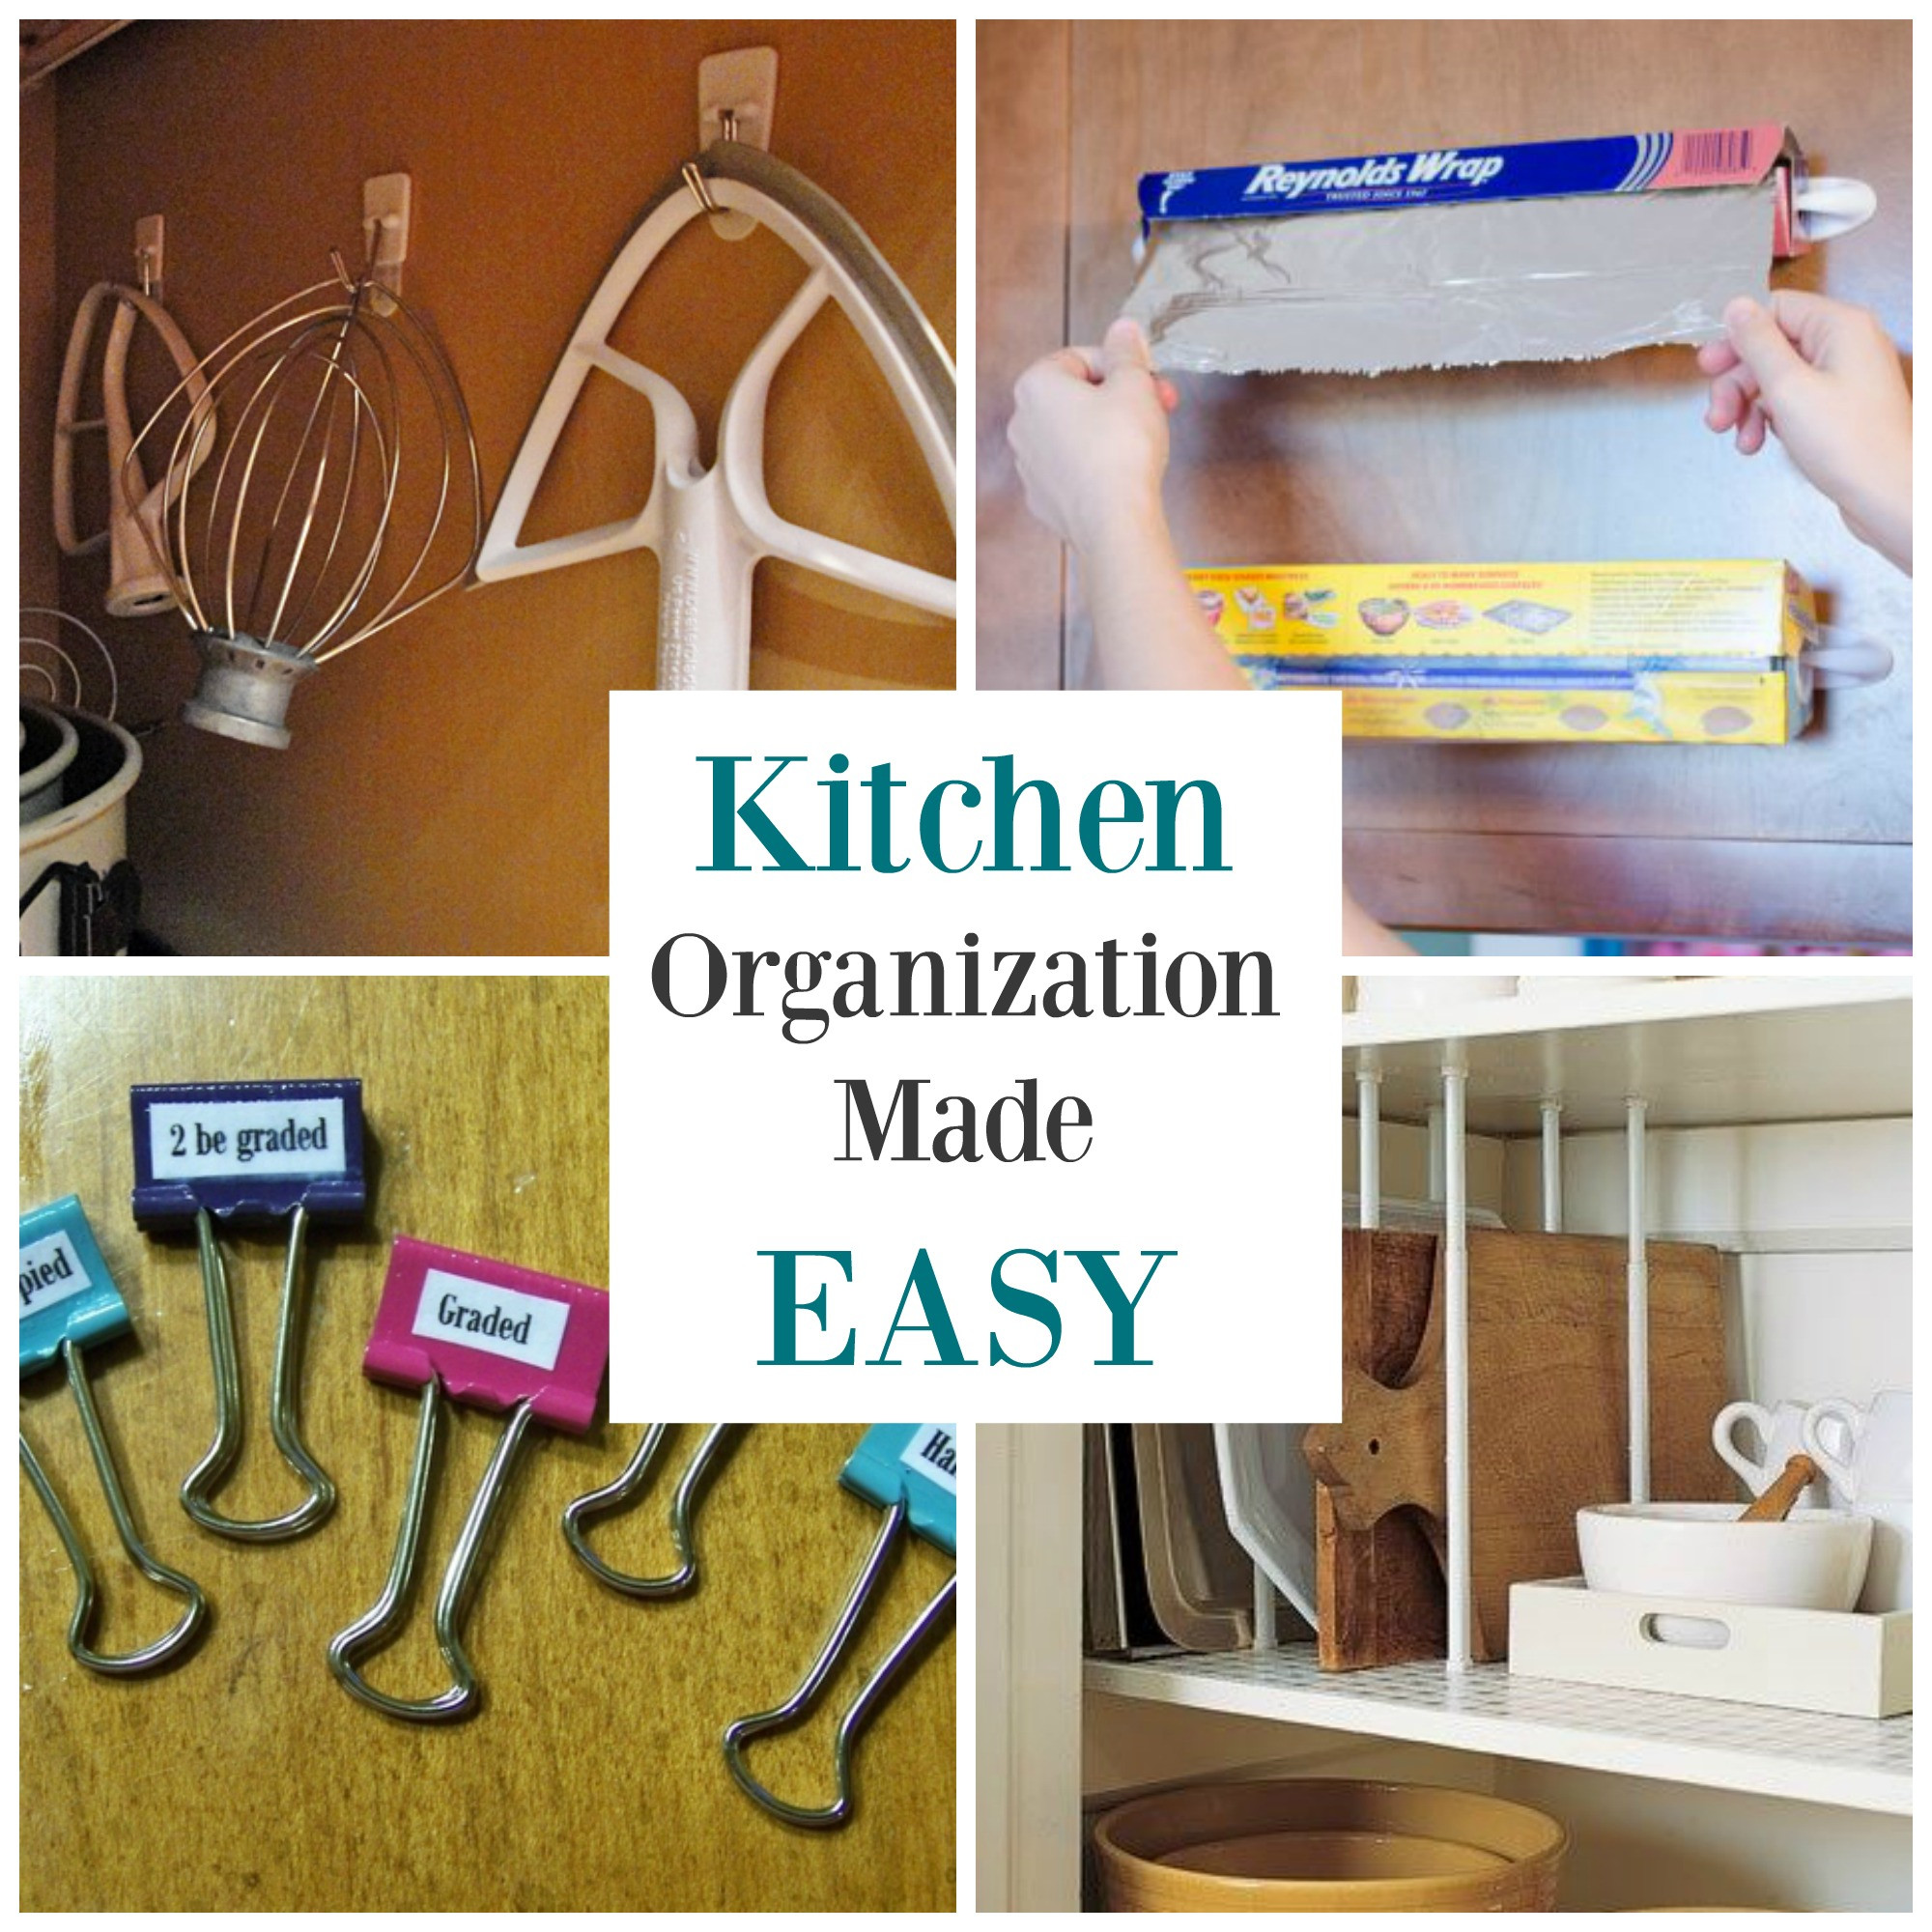 Kitchen Organizing Hacks
 Kitchen Organization Doesn t Have To Be Hard With These 5